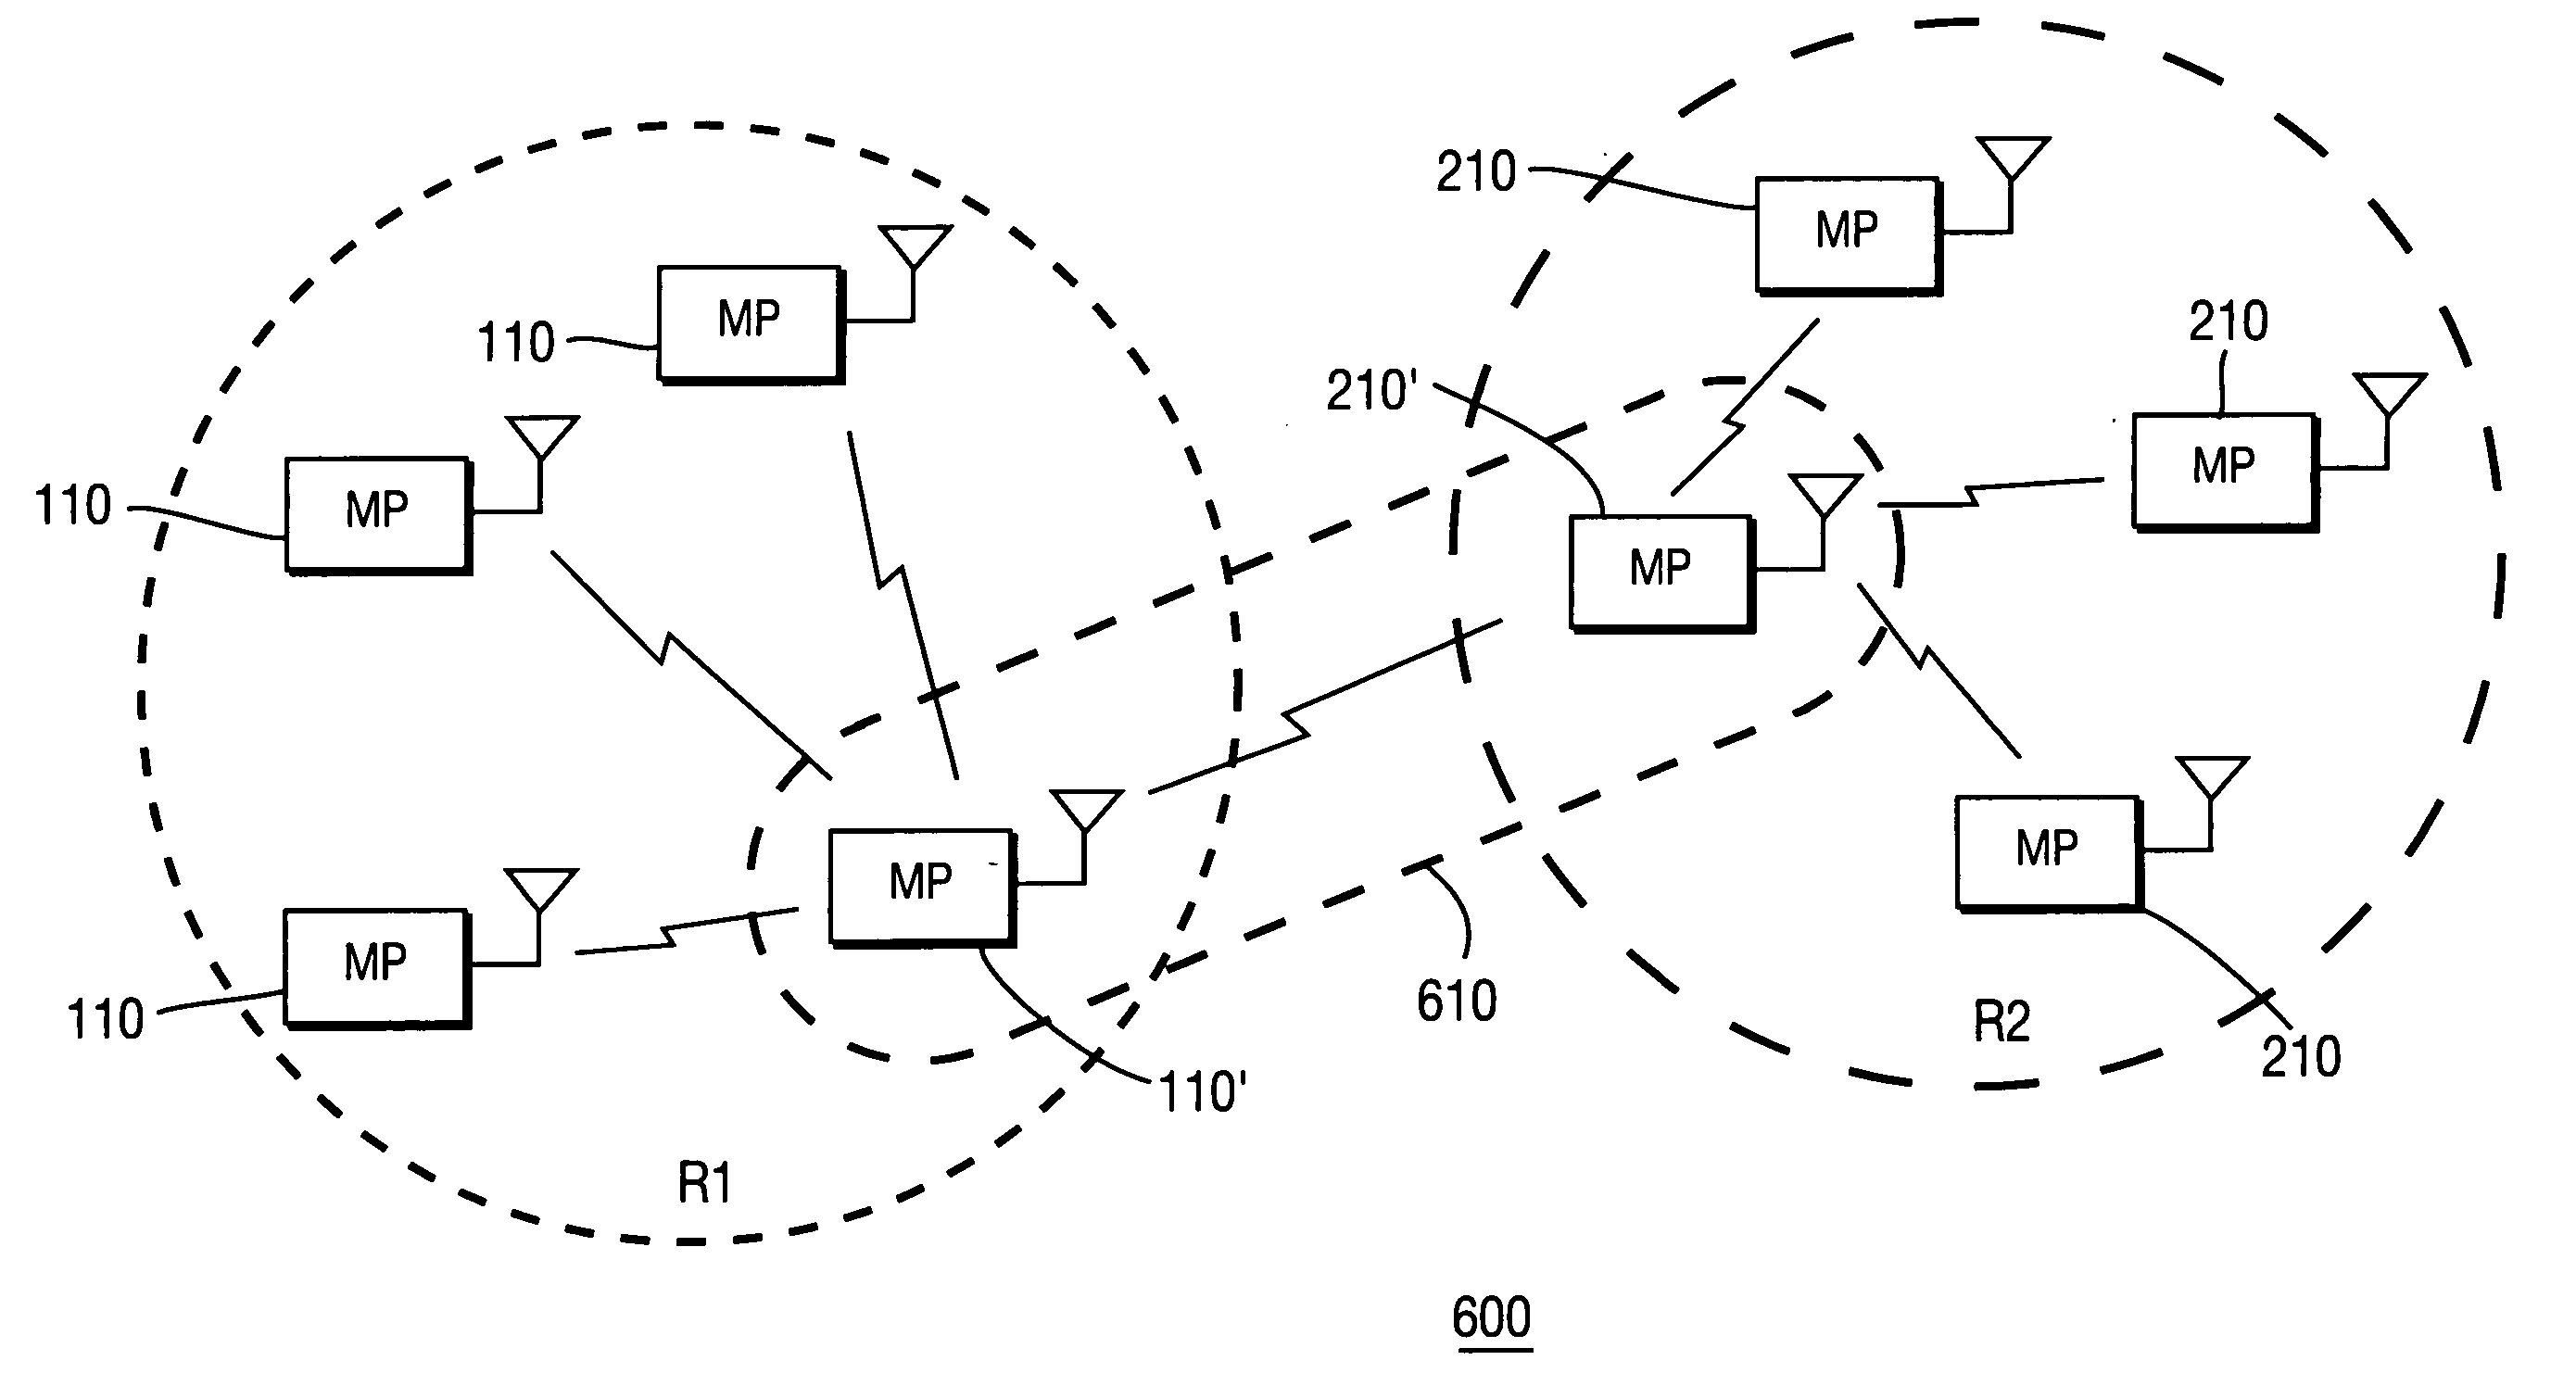 Mesh network configured to autonomously commission a network and manage the network topology